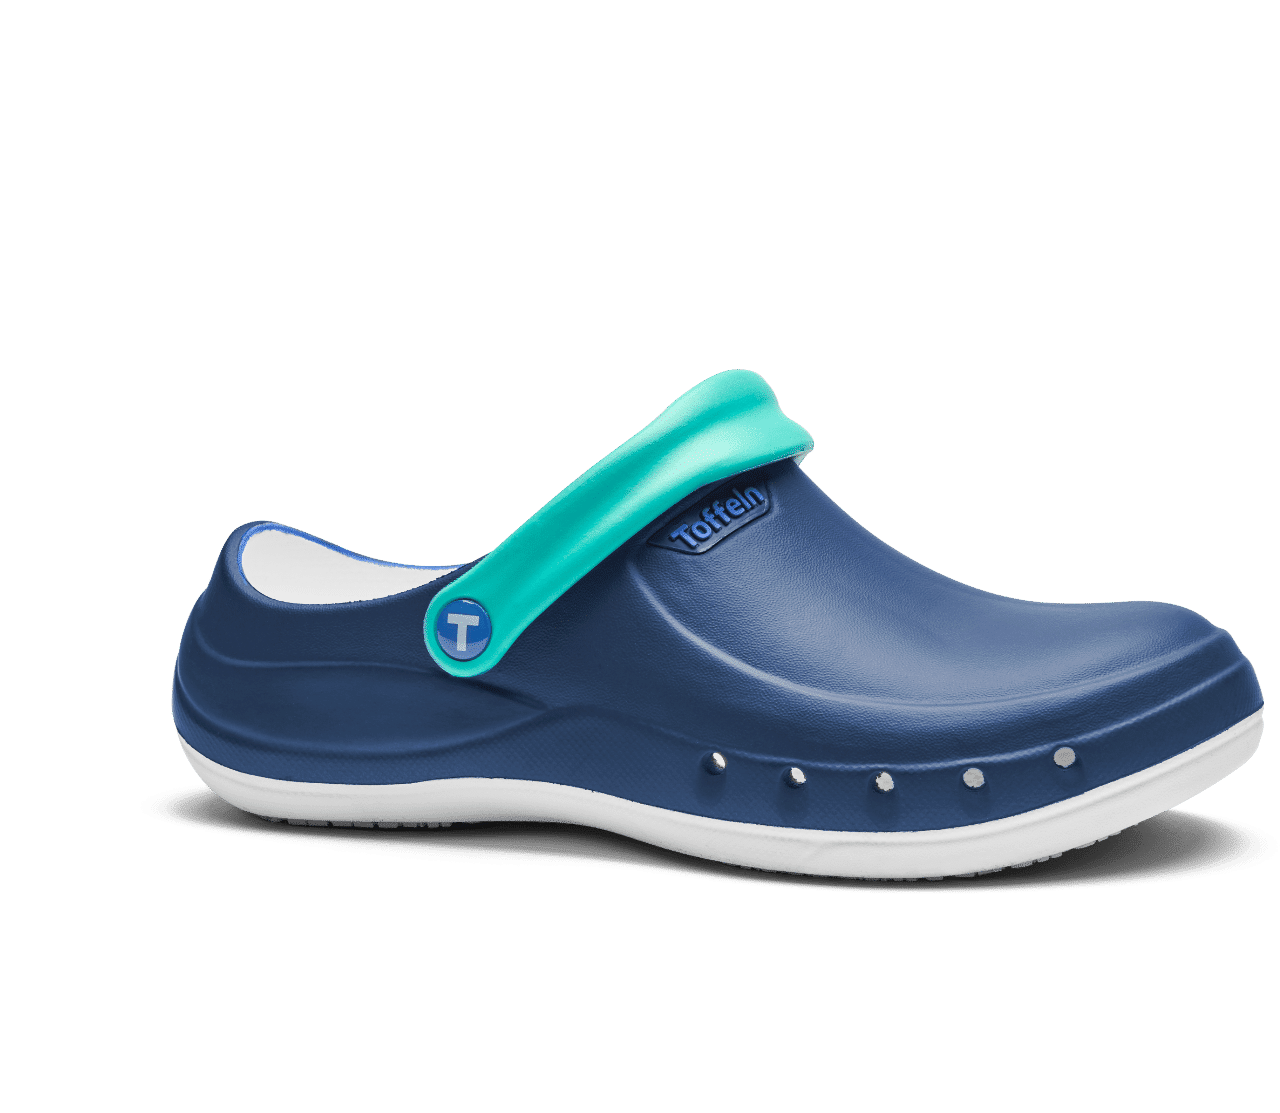 Perfect for Nurses and Doctors Comfortable Slip Resistant Grip Excellent Breathability Toffeln EziKlog Clogs Grip-Safe Sole Shock Absorbing Anti-Static Materials Lightweight